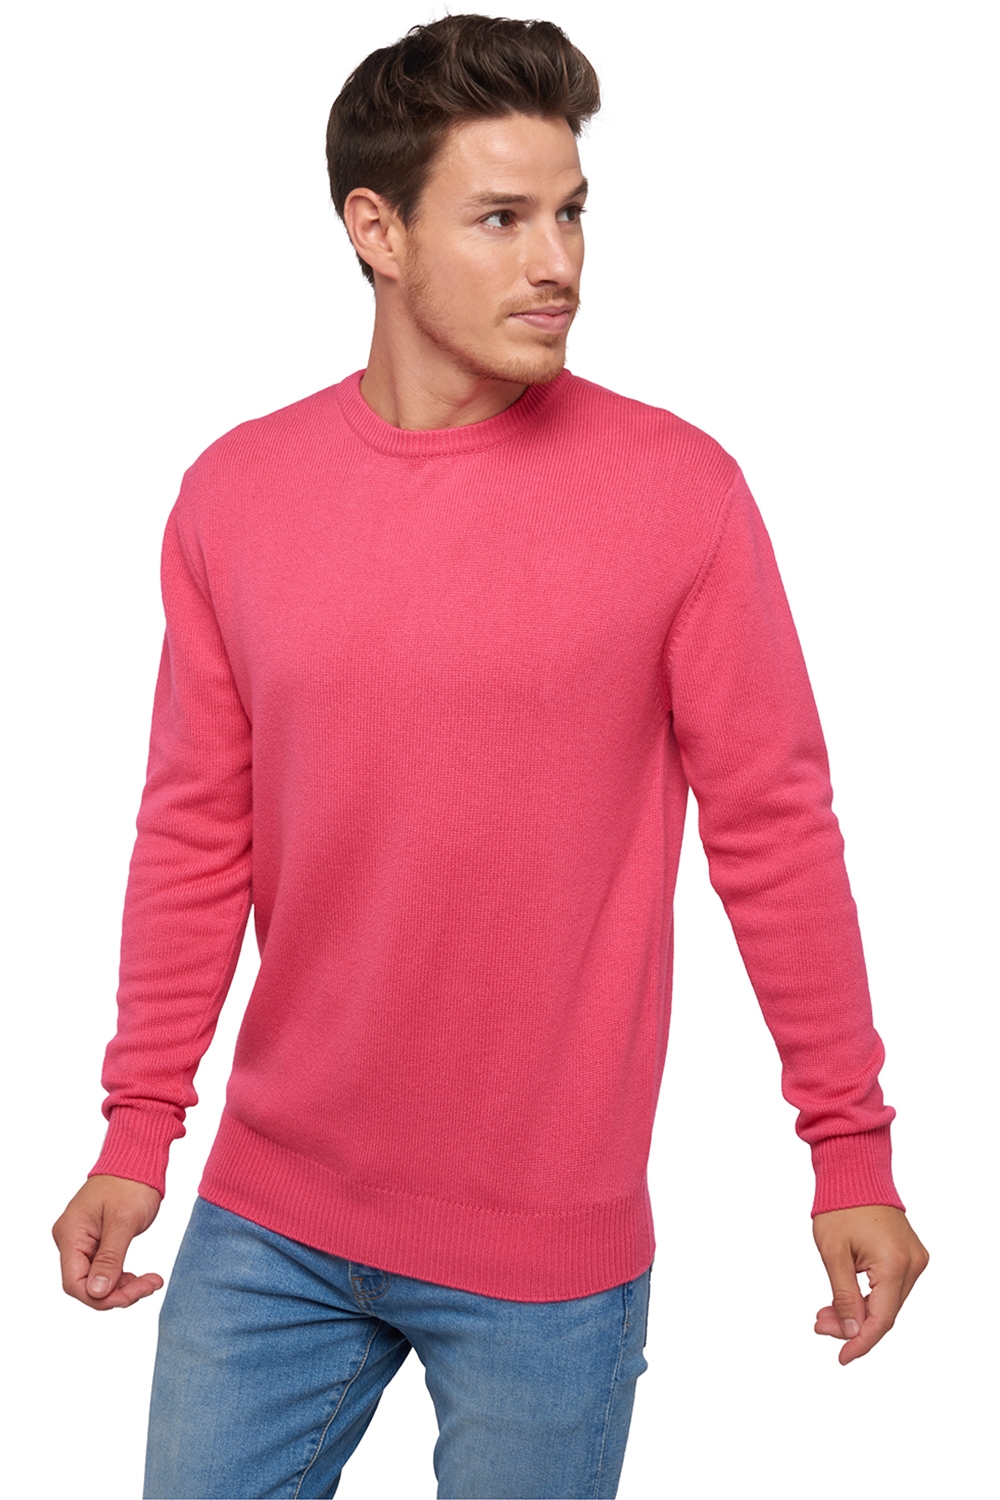 Cachemire pull homme col rond nestor 4f rose shocking 4xl